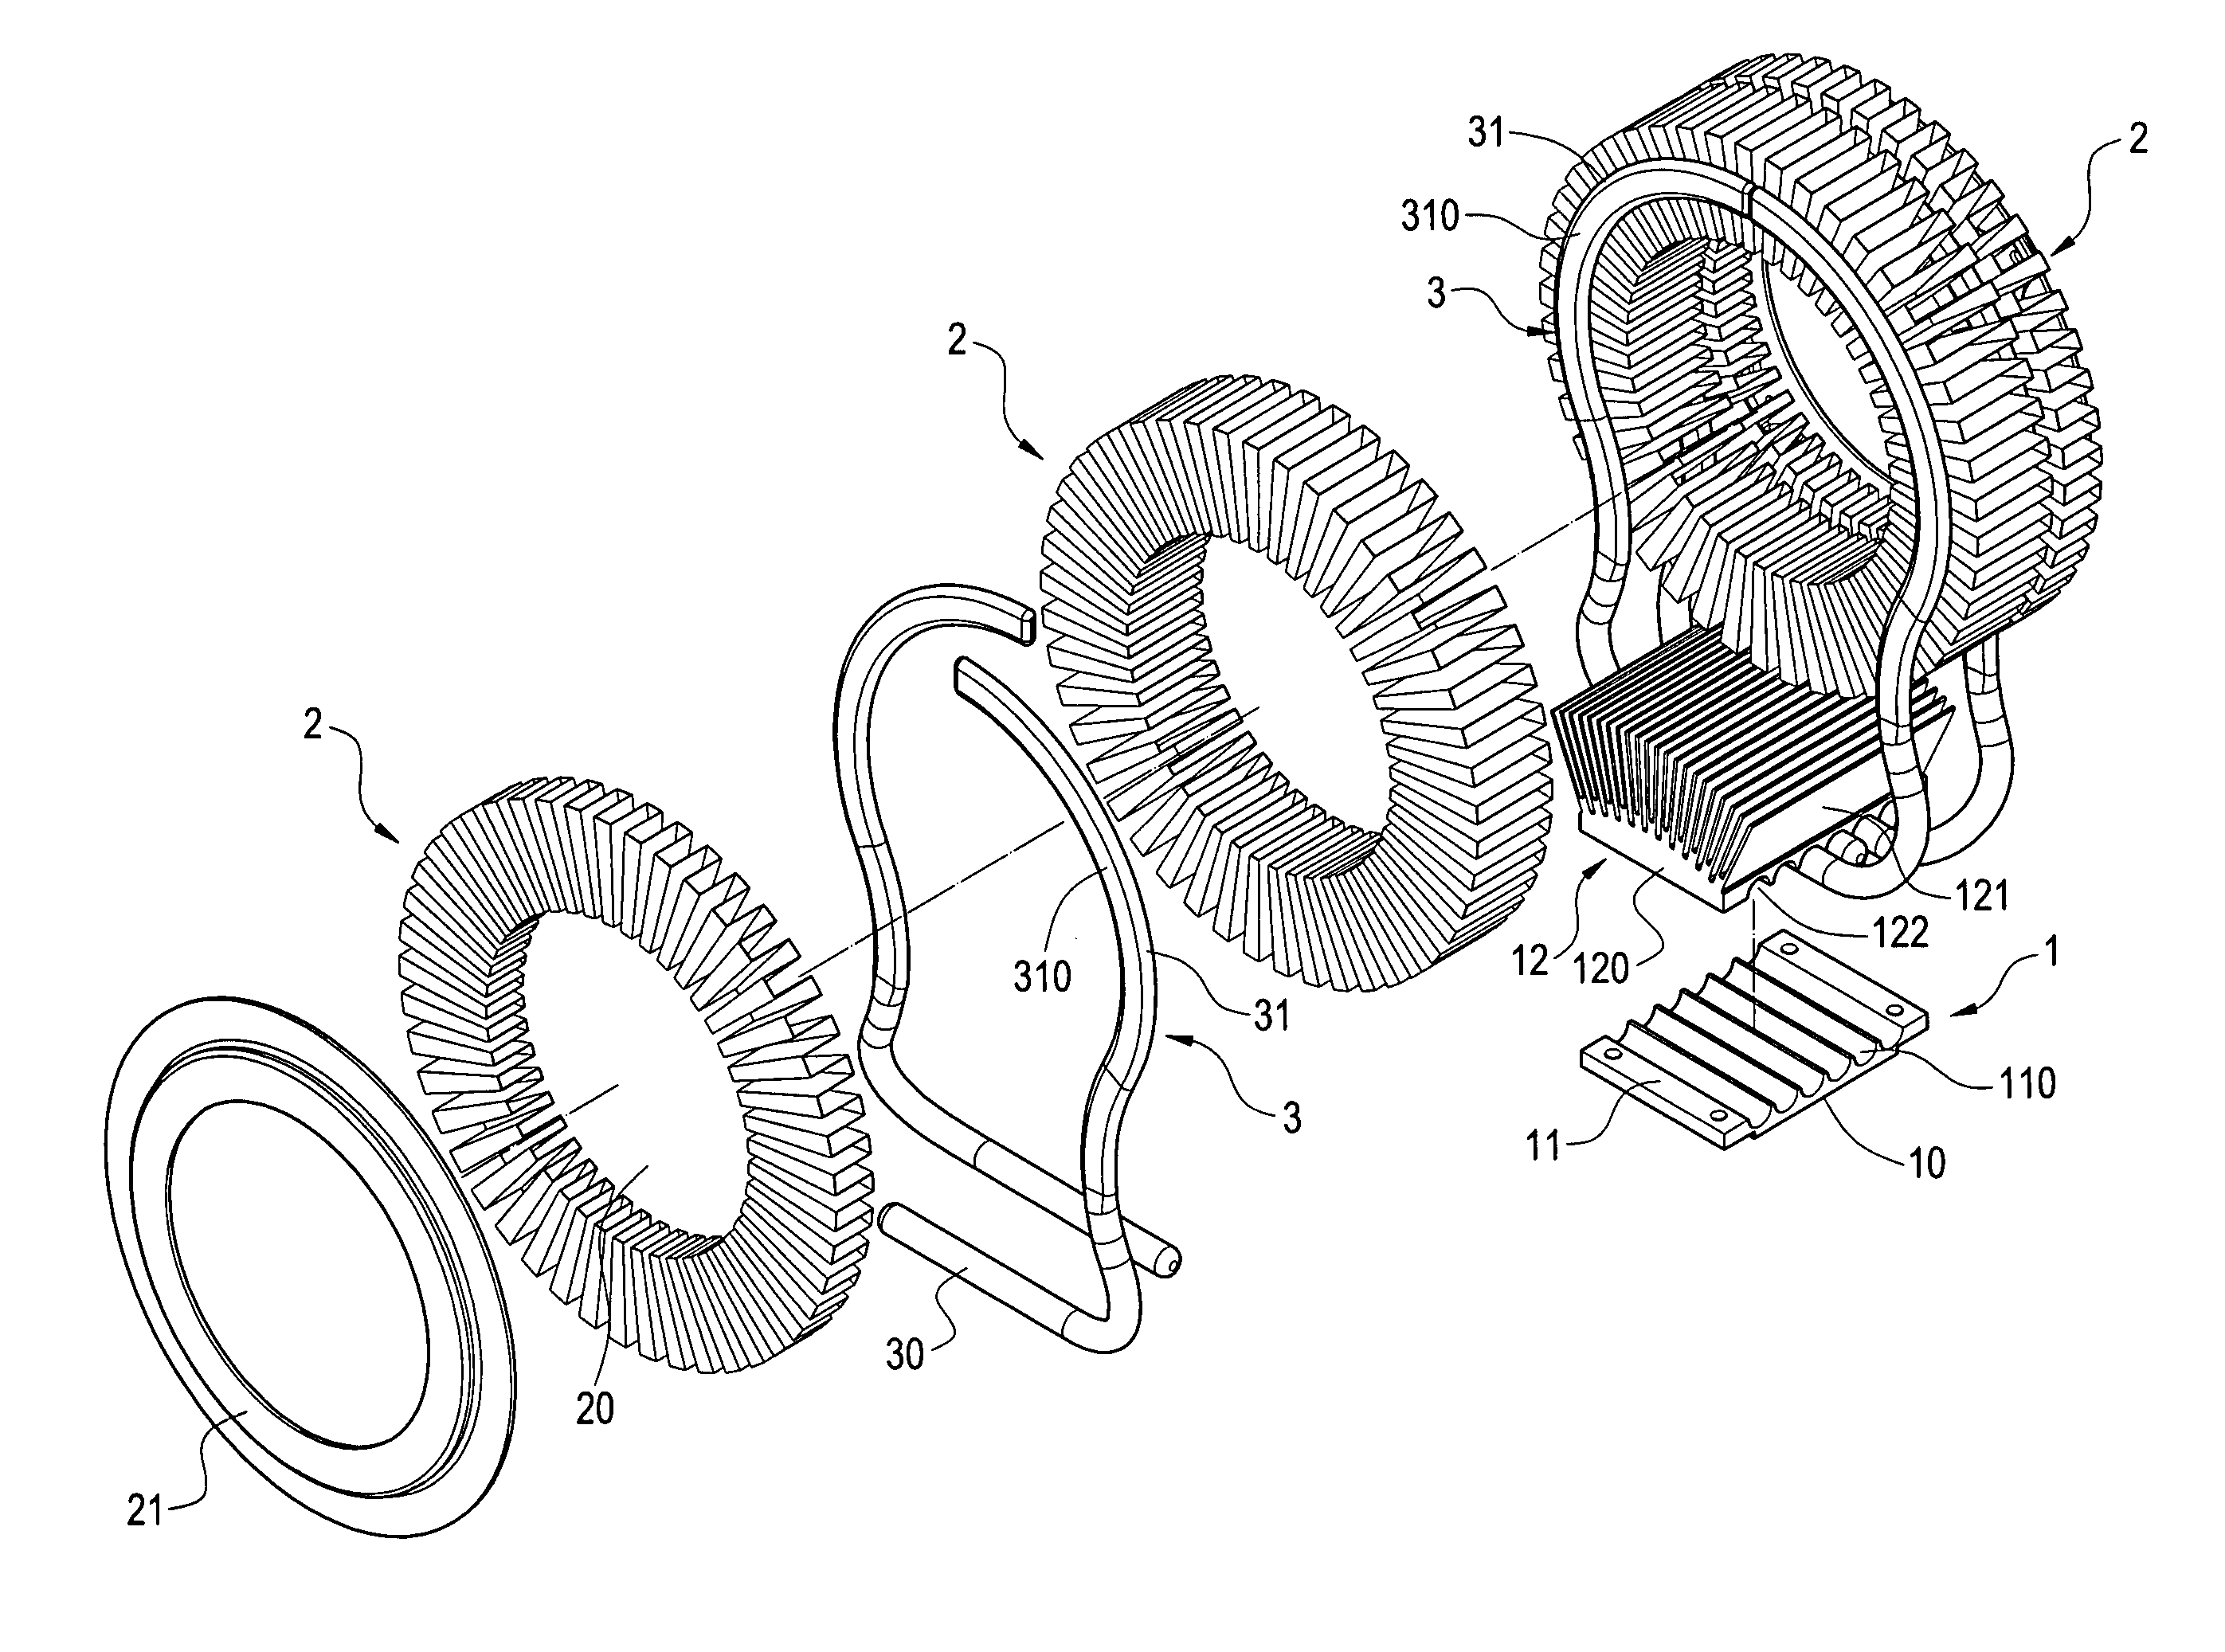 Cooling device with ringed fins